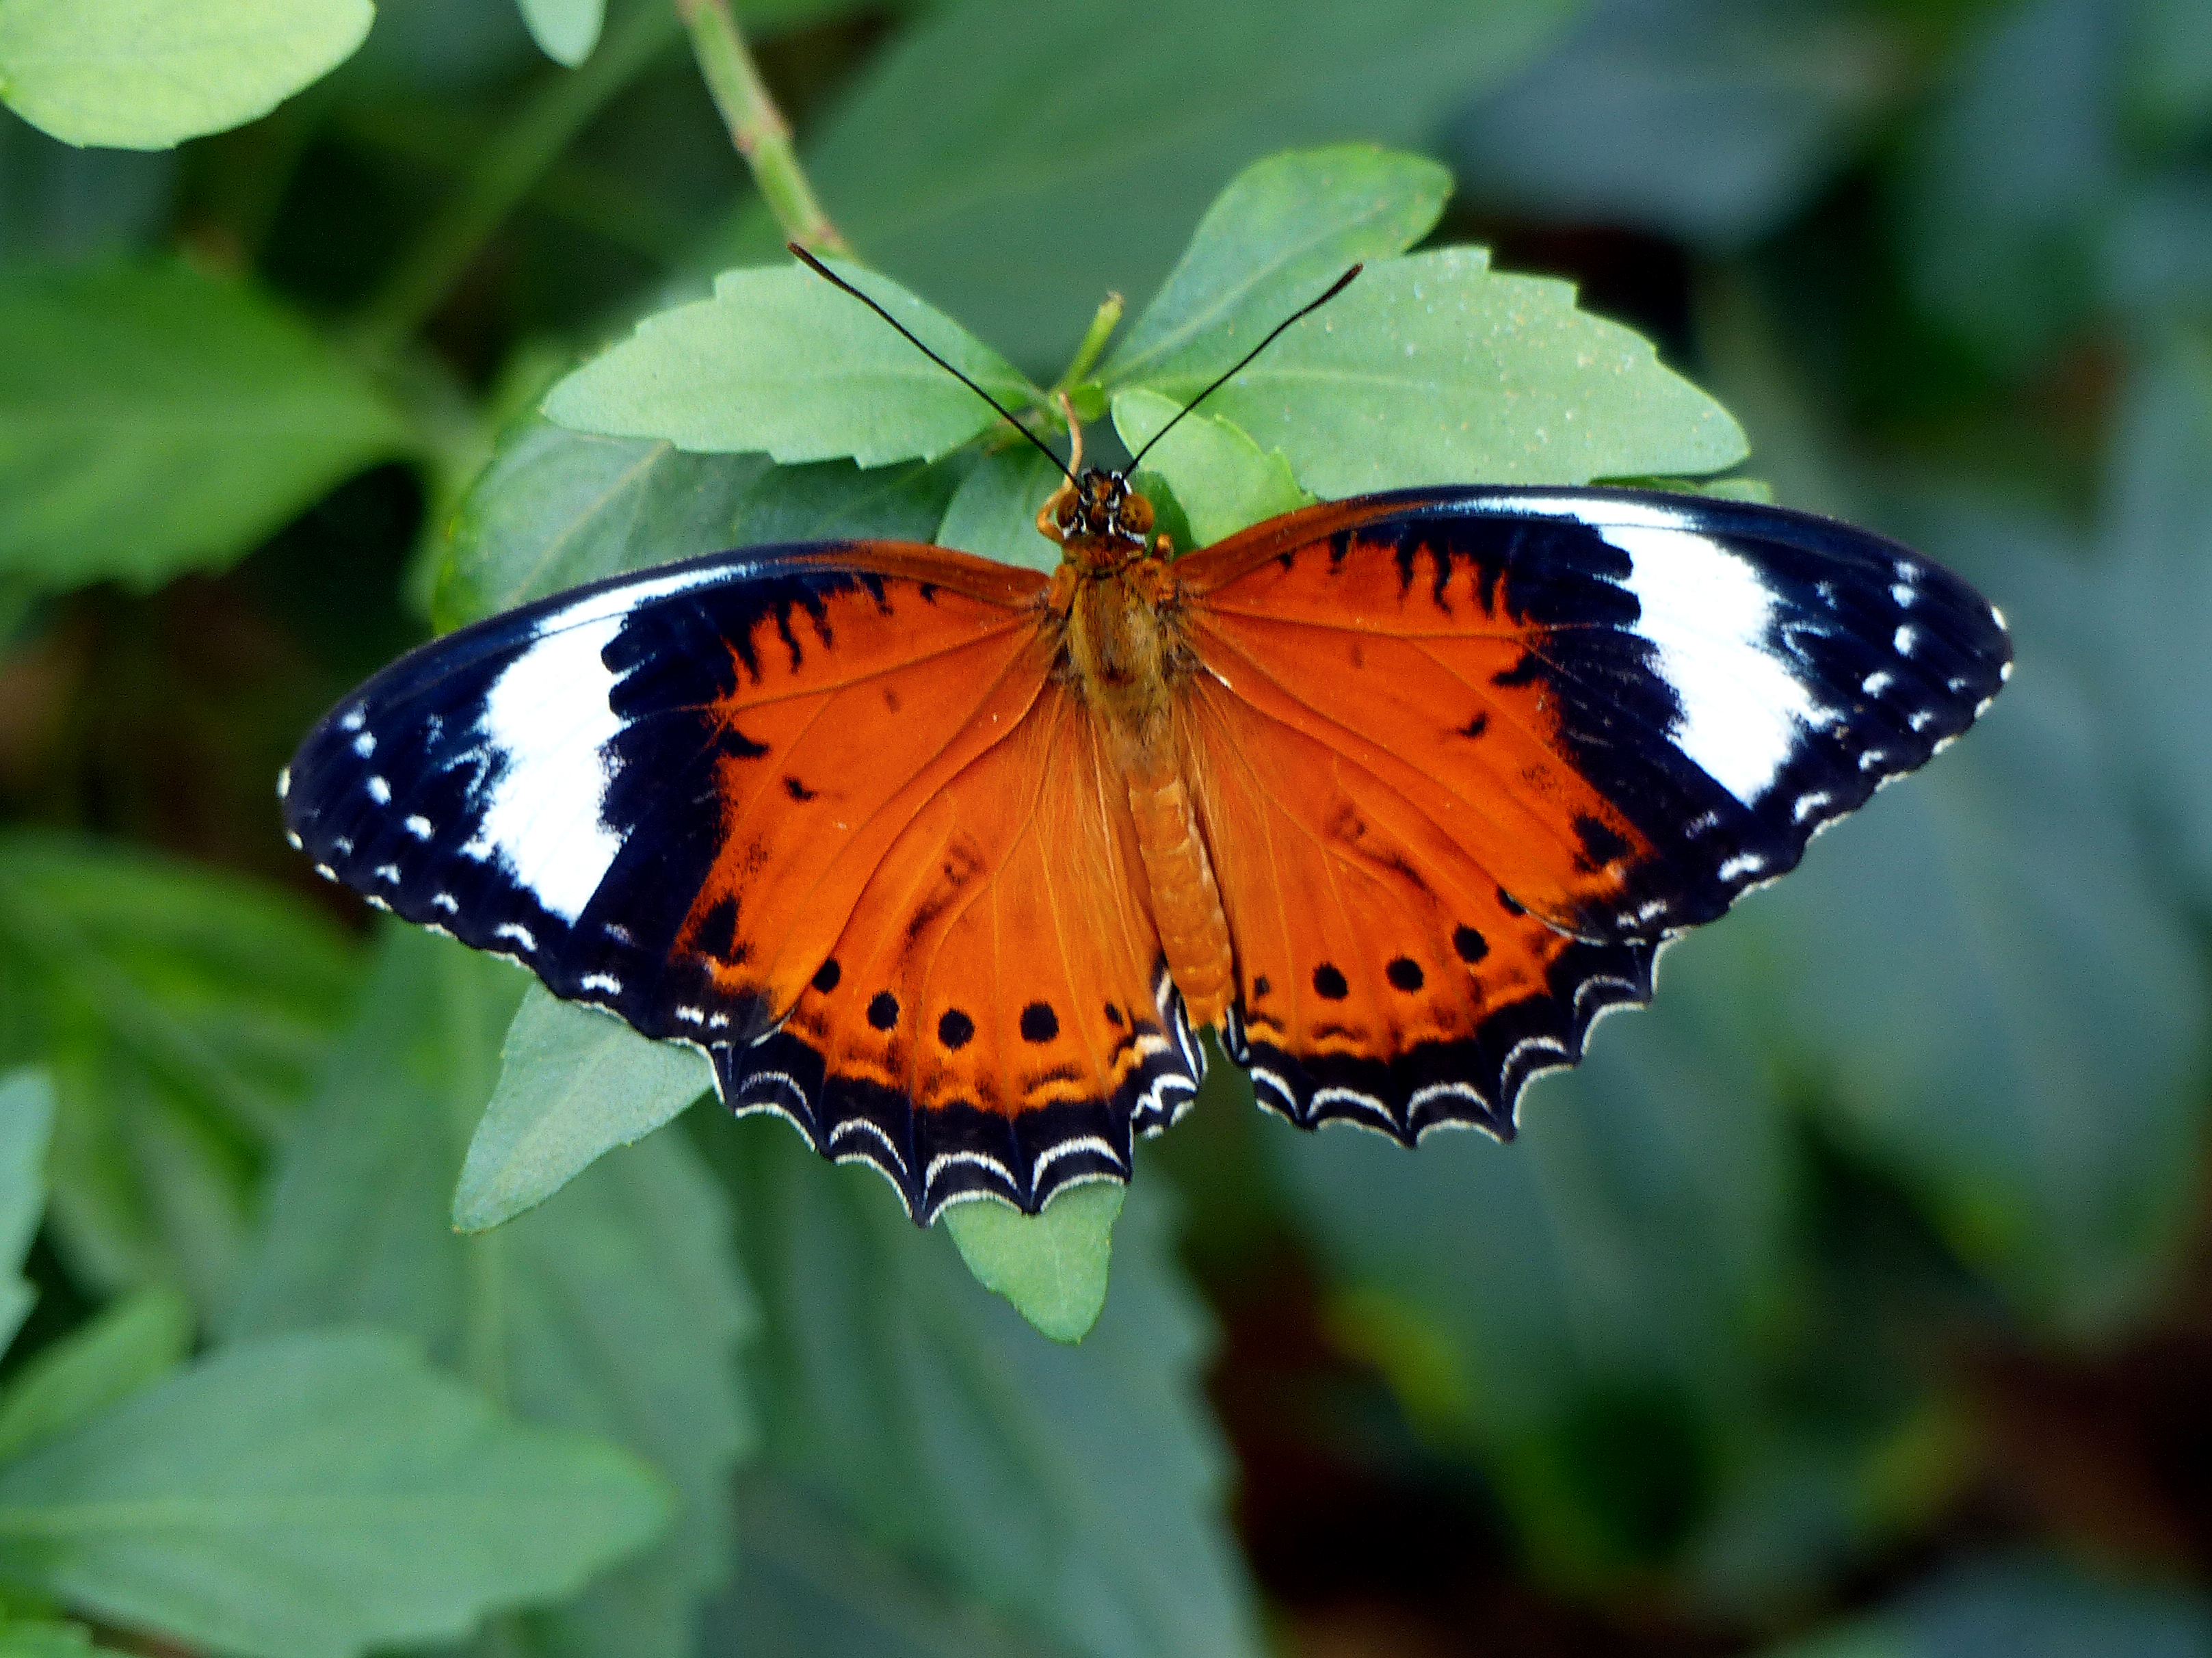 The leopard lacewing (cethosia cyane) photo